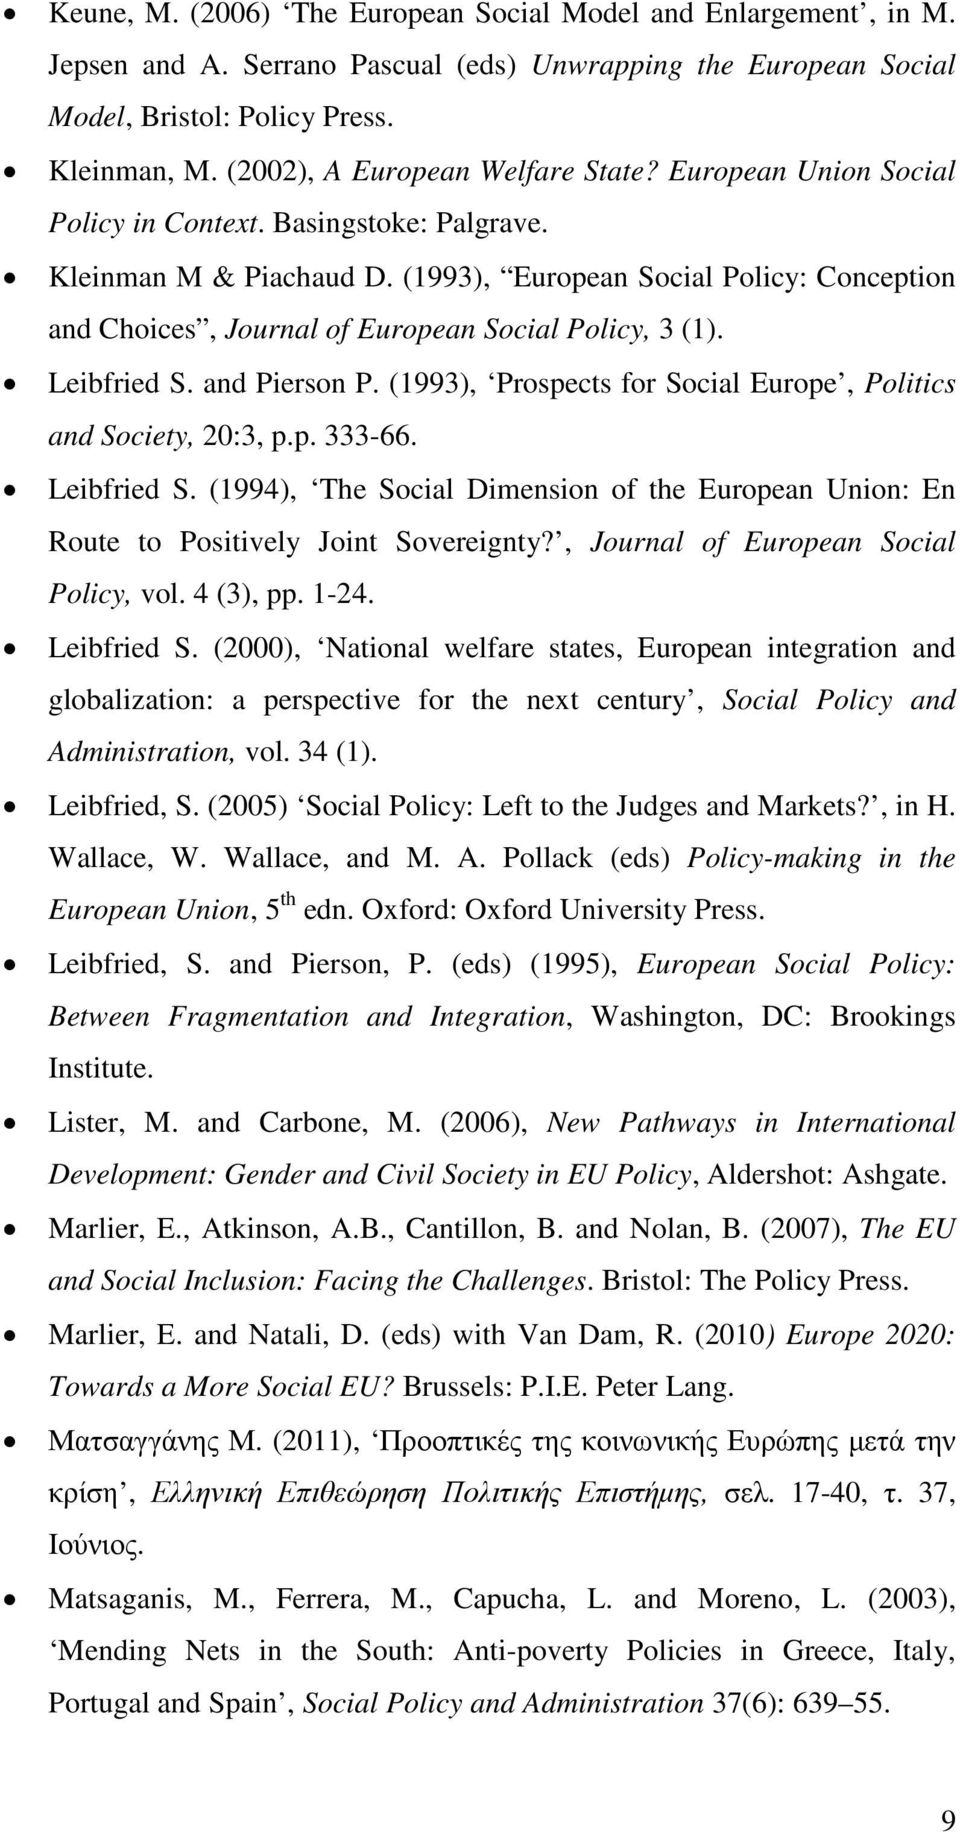 (1993), European Social Policy: Conception and Choices, Journal of European Social Policy, 3 (1). Leibfried S. and Pierson P. (1993), Prospects for Social Europe, Politics and Society, 20:3, p.p. 333-66.